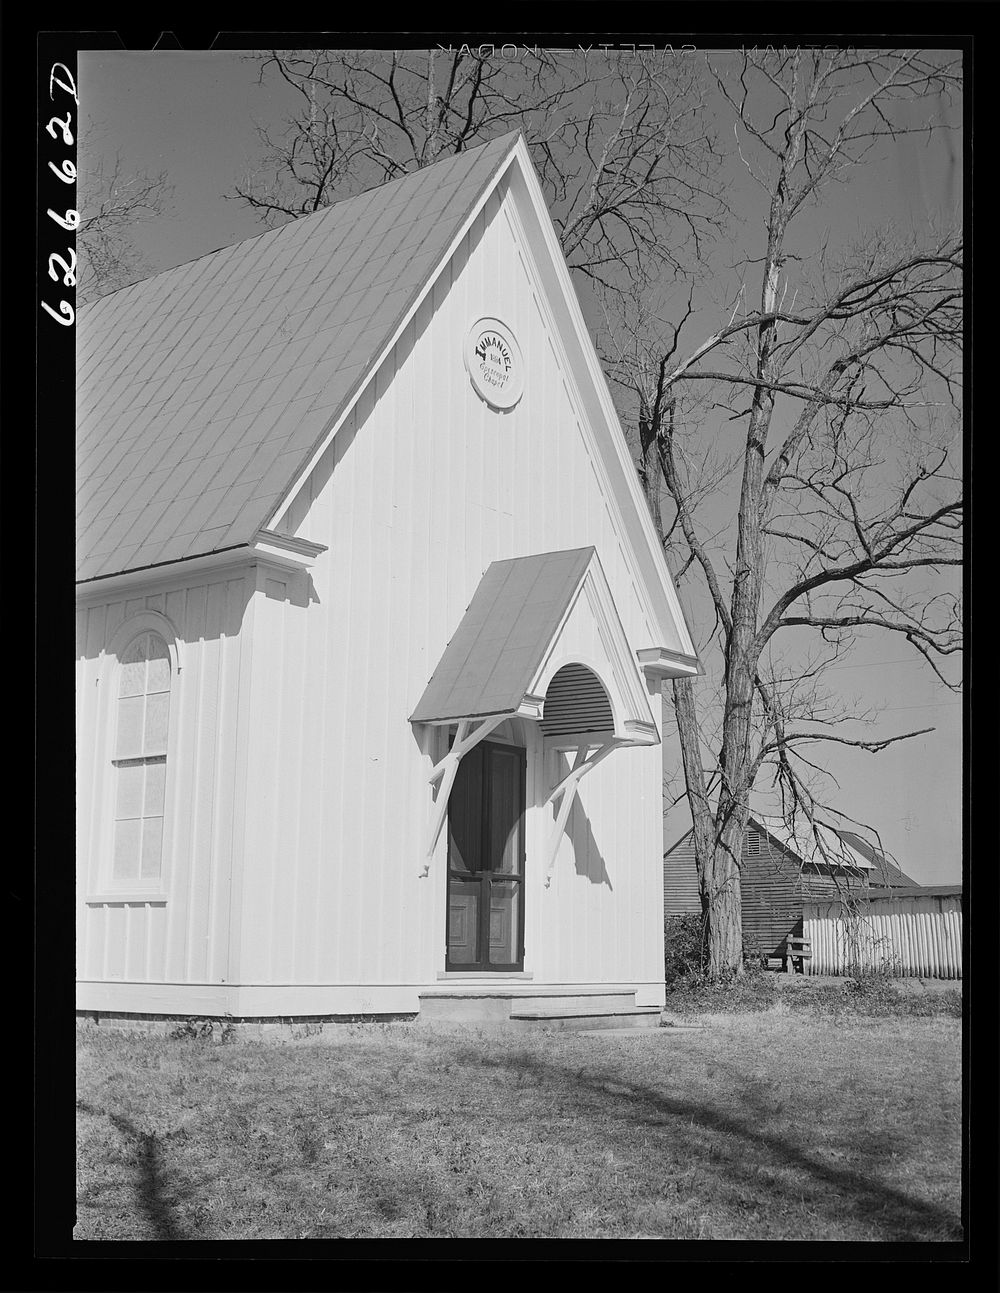 [Untitled photo, possibly related to: Episcopal church. King William County, Virginia]. Sourced from the Library of Congress.